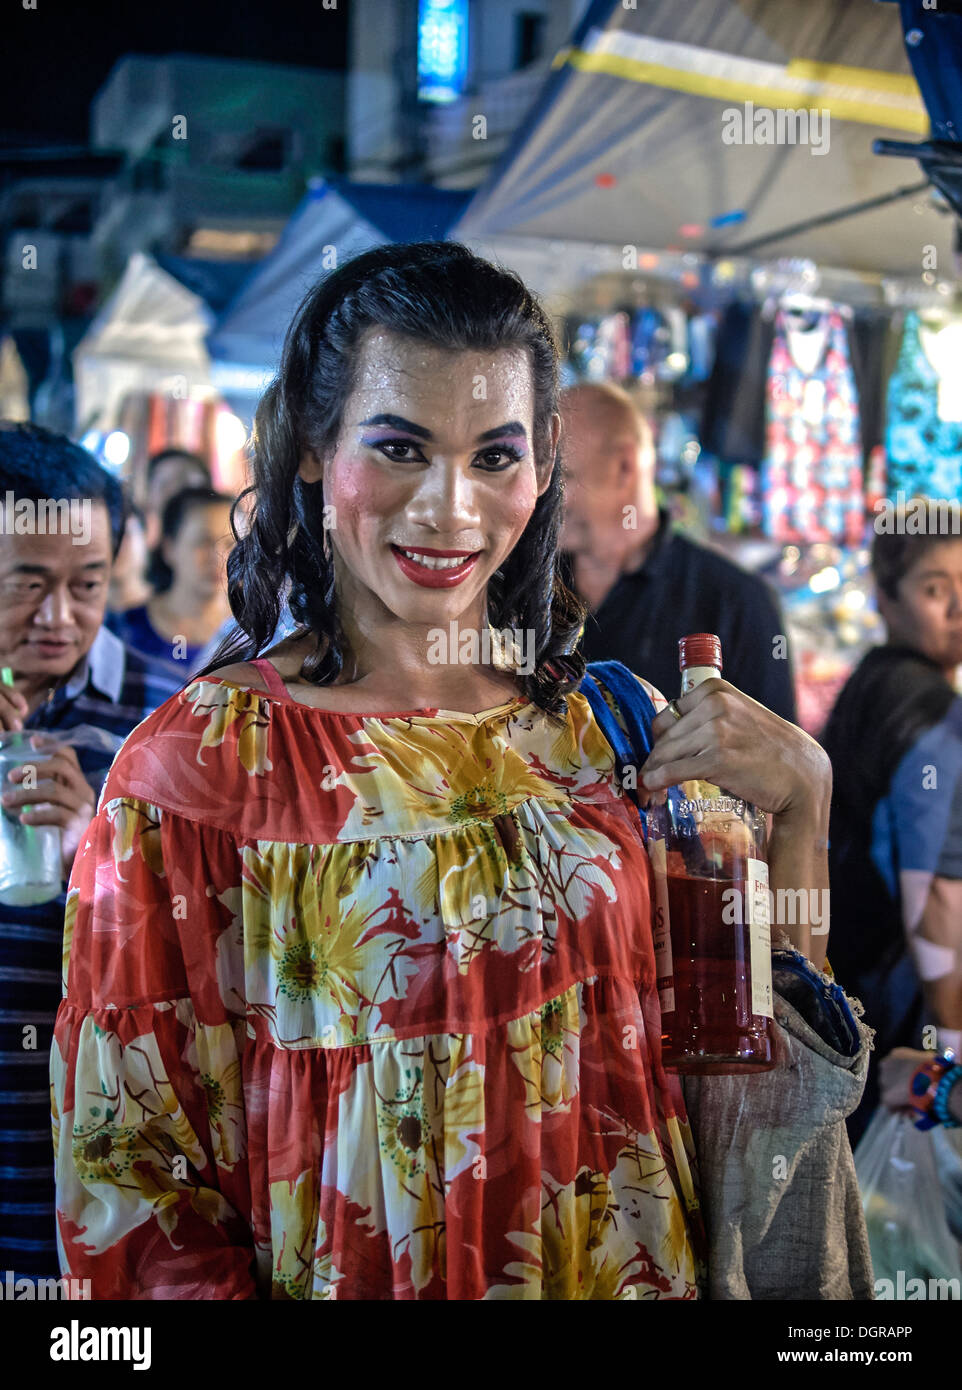 Thailand transsexual selling shots of liquor in the market place. Thailand S. E. Asia Stock Photo